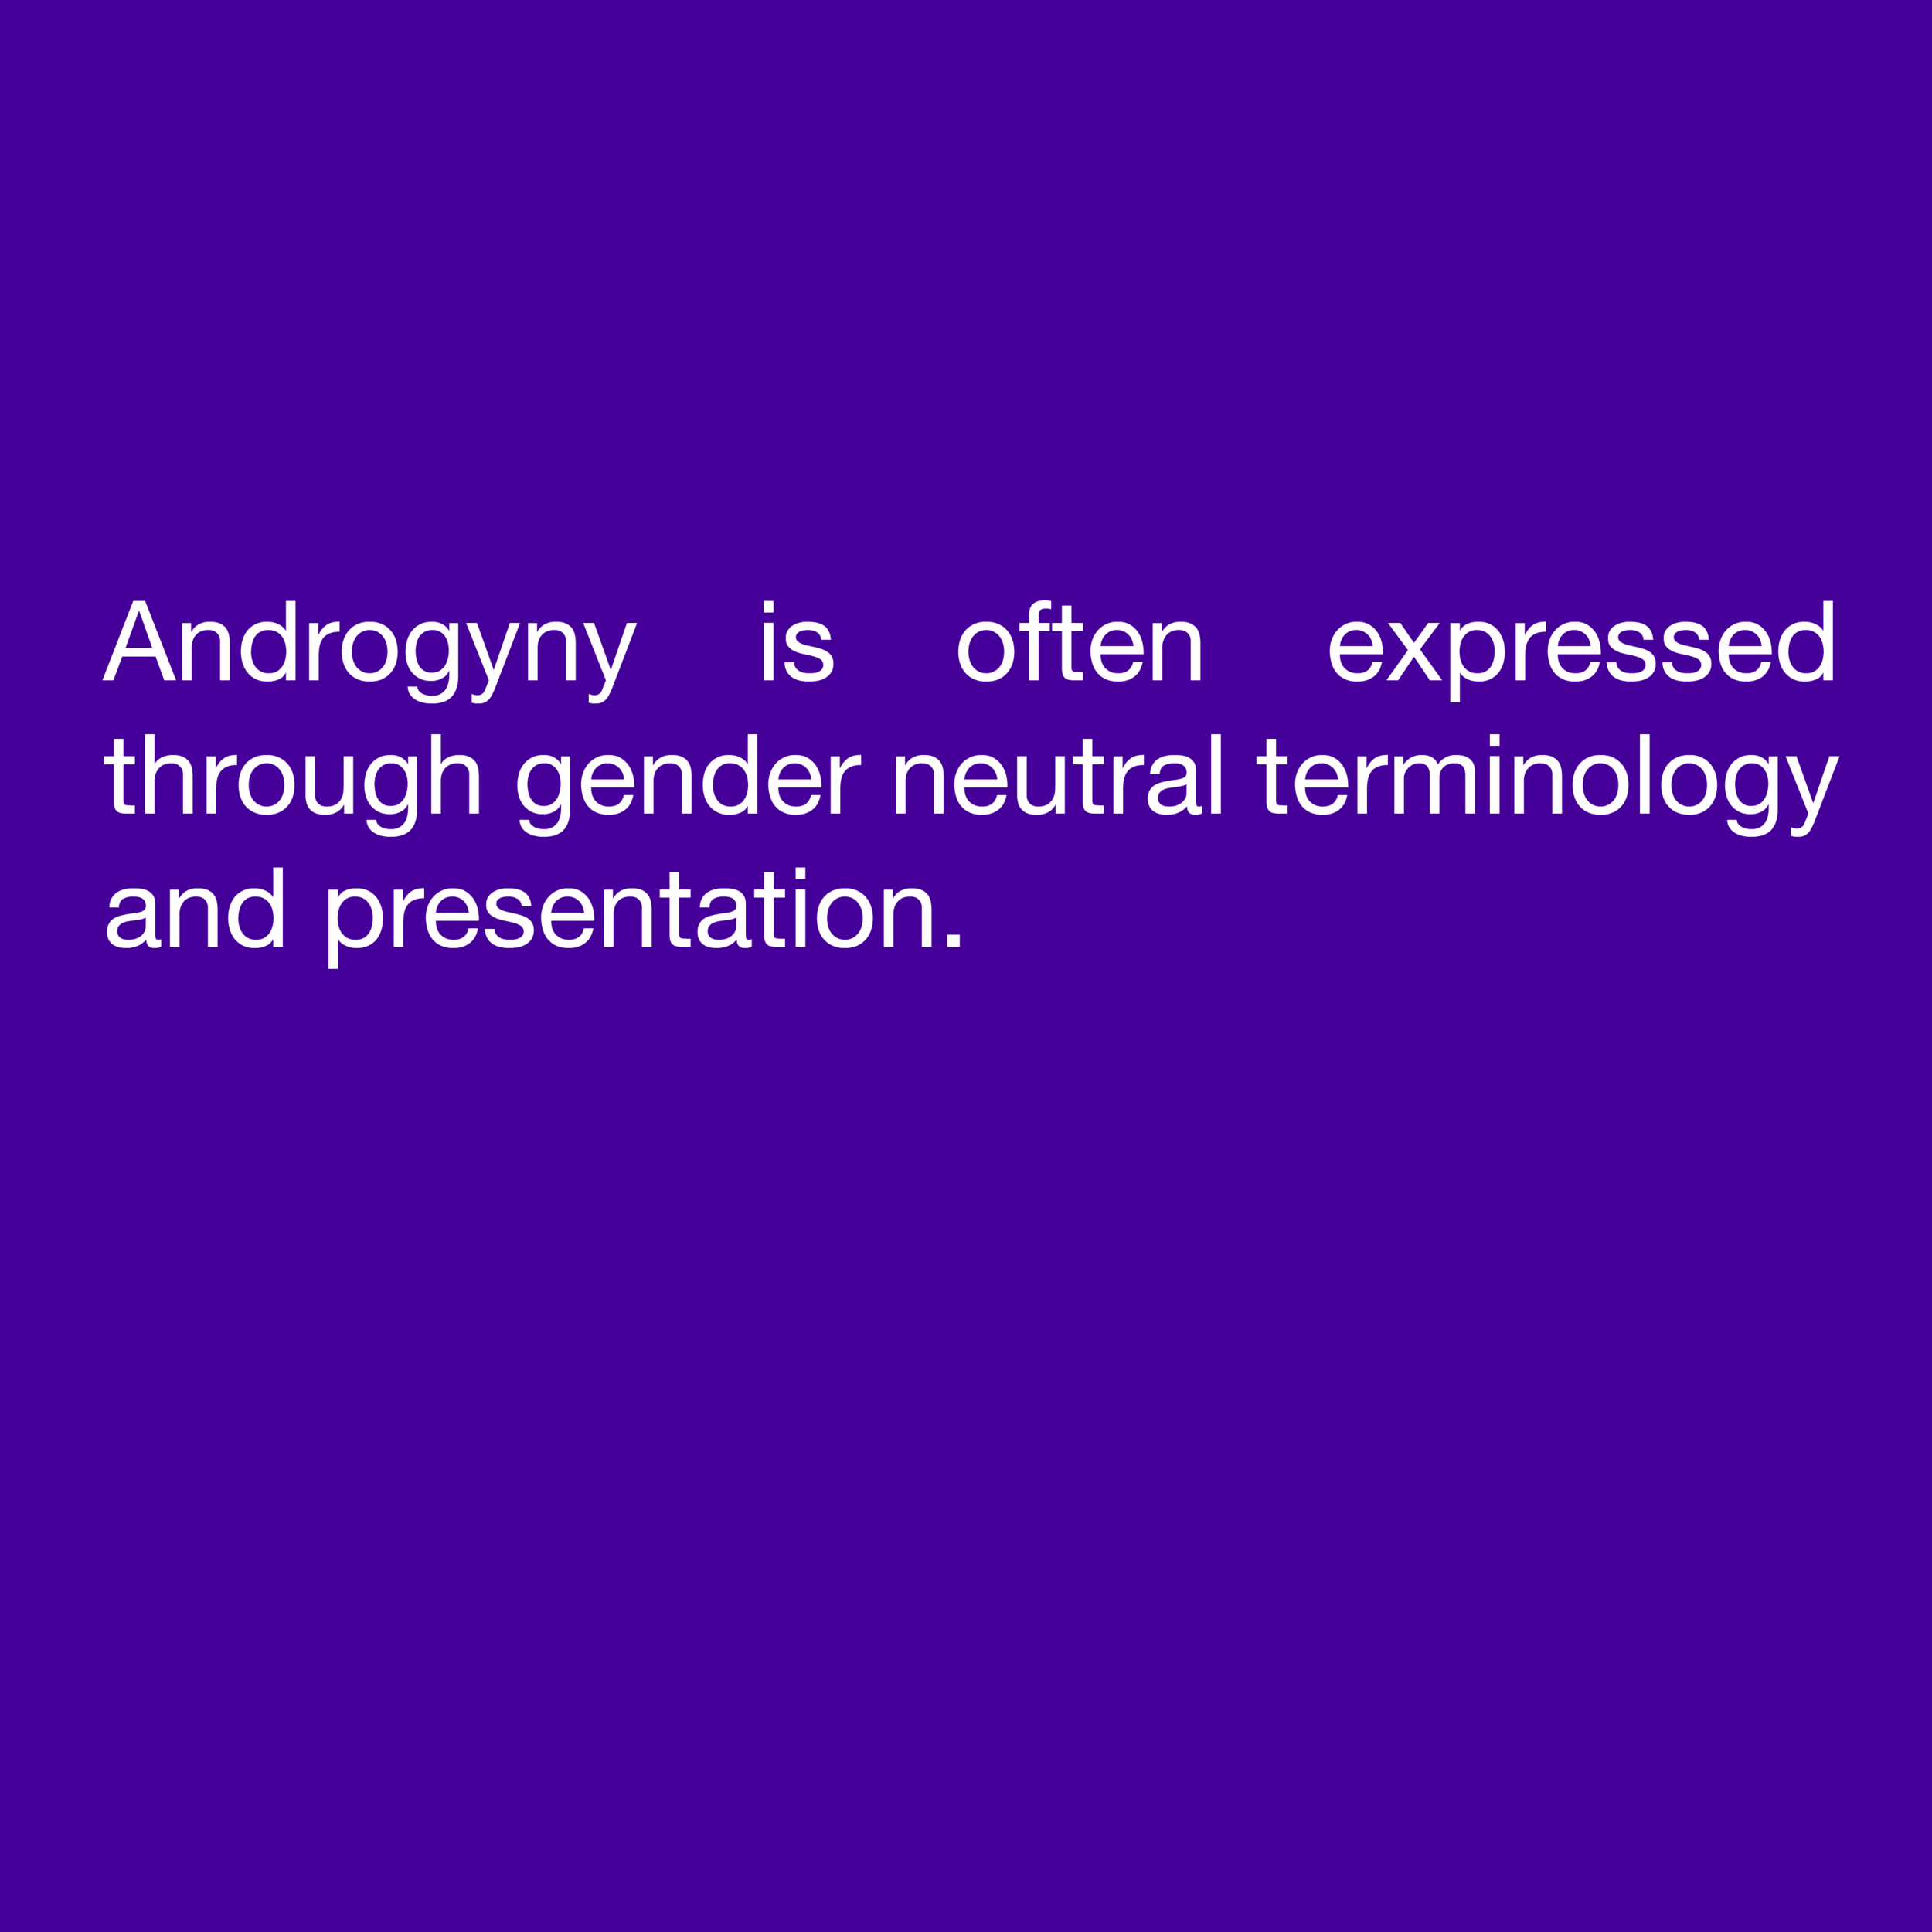  Androgyny is often expressed through gender neutral terminology and presentation. 